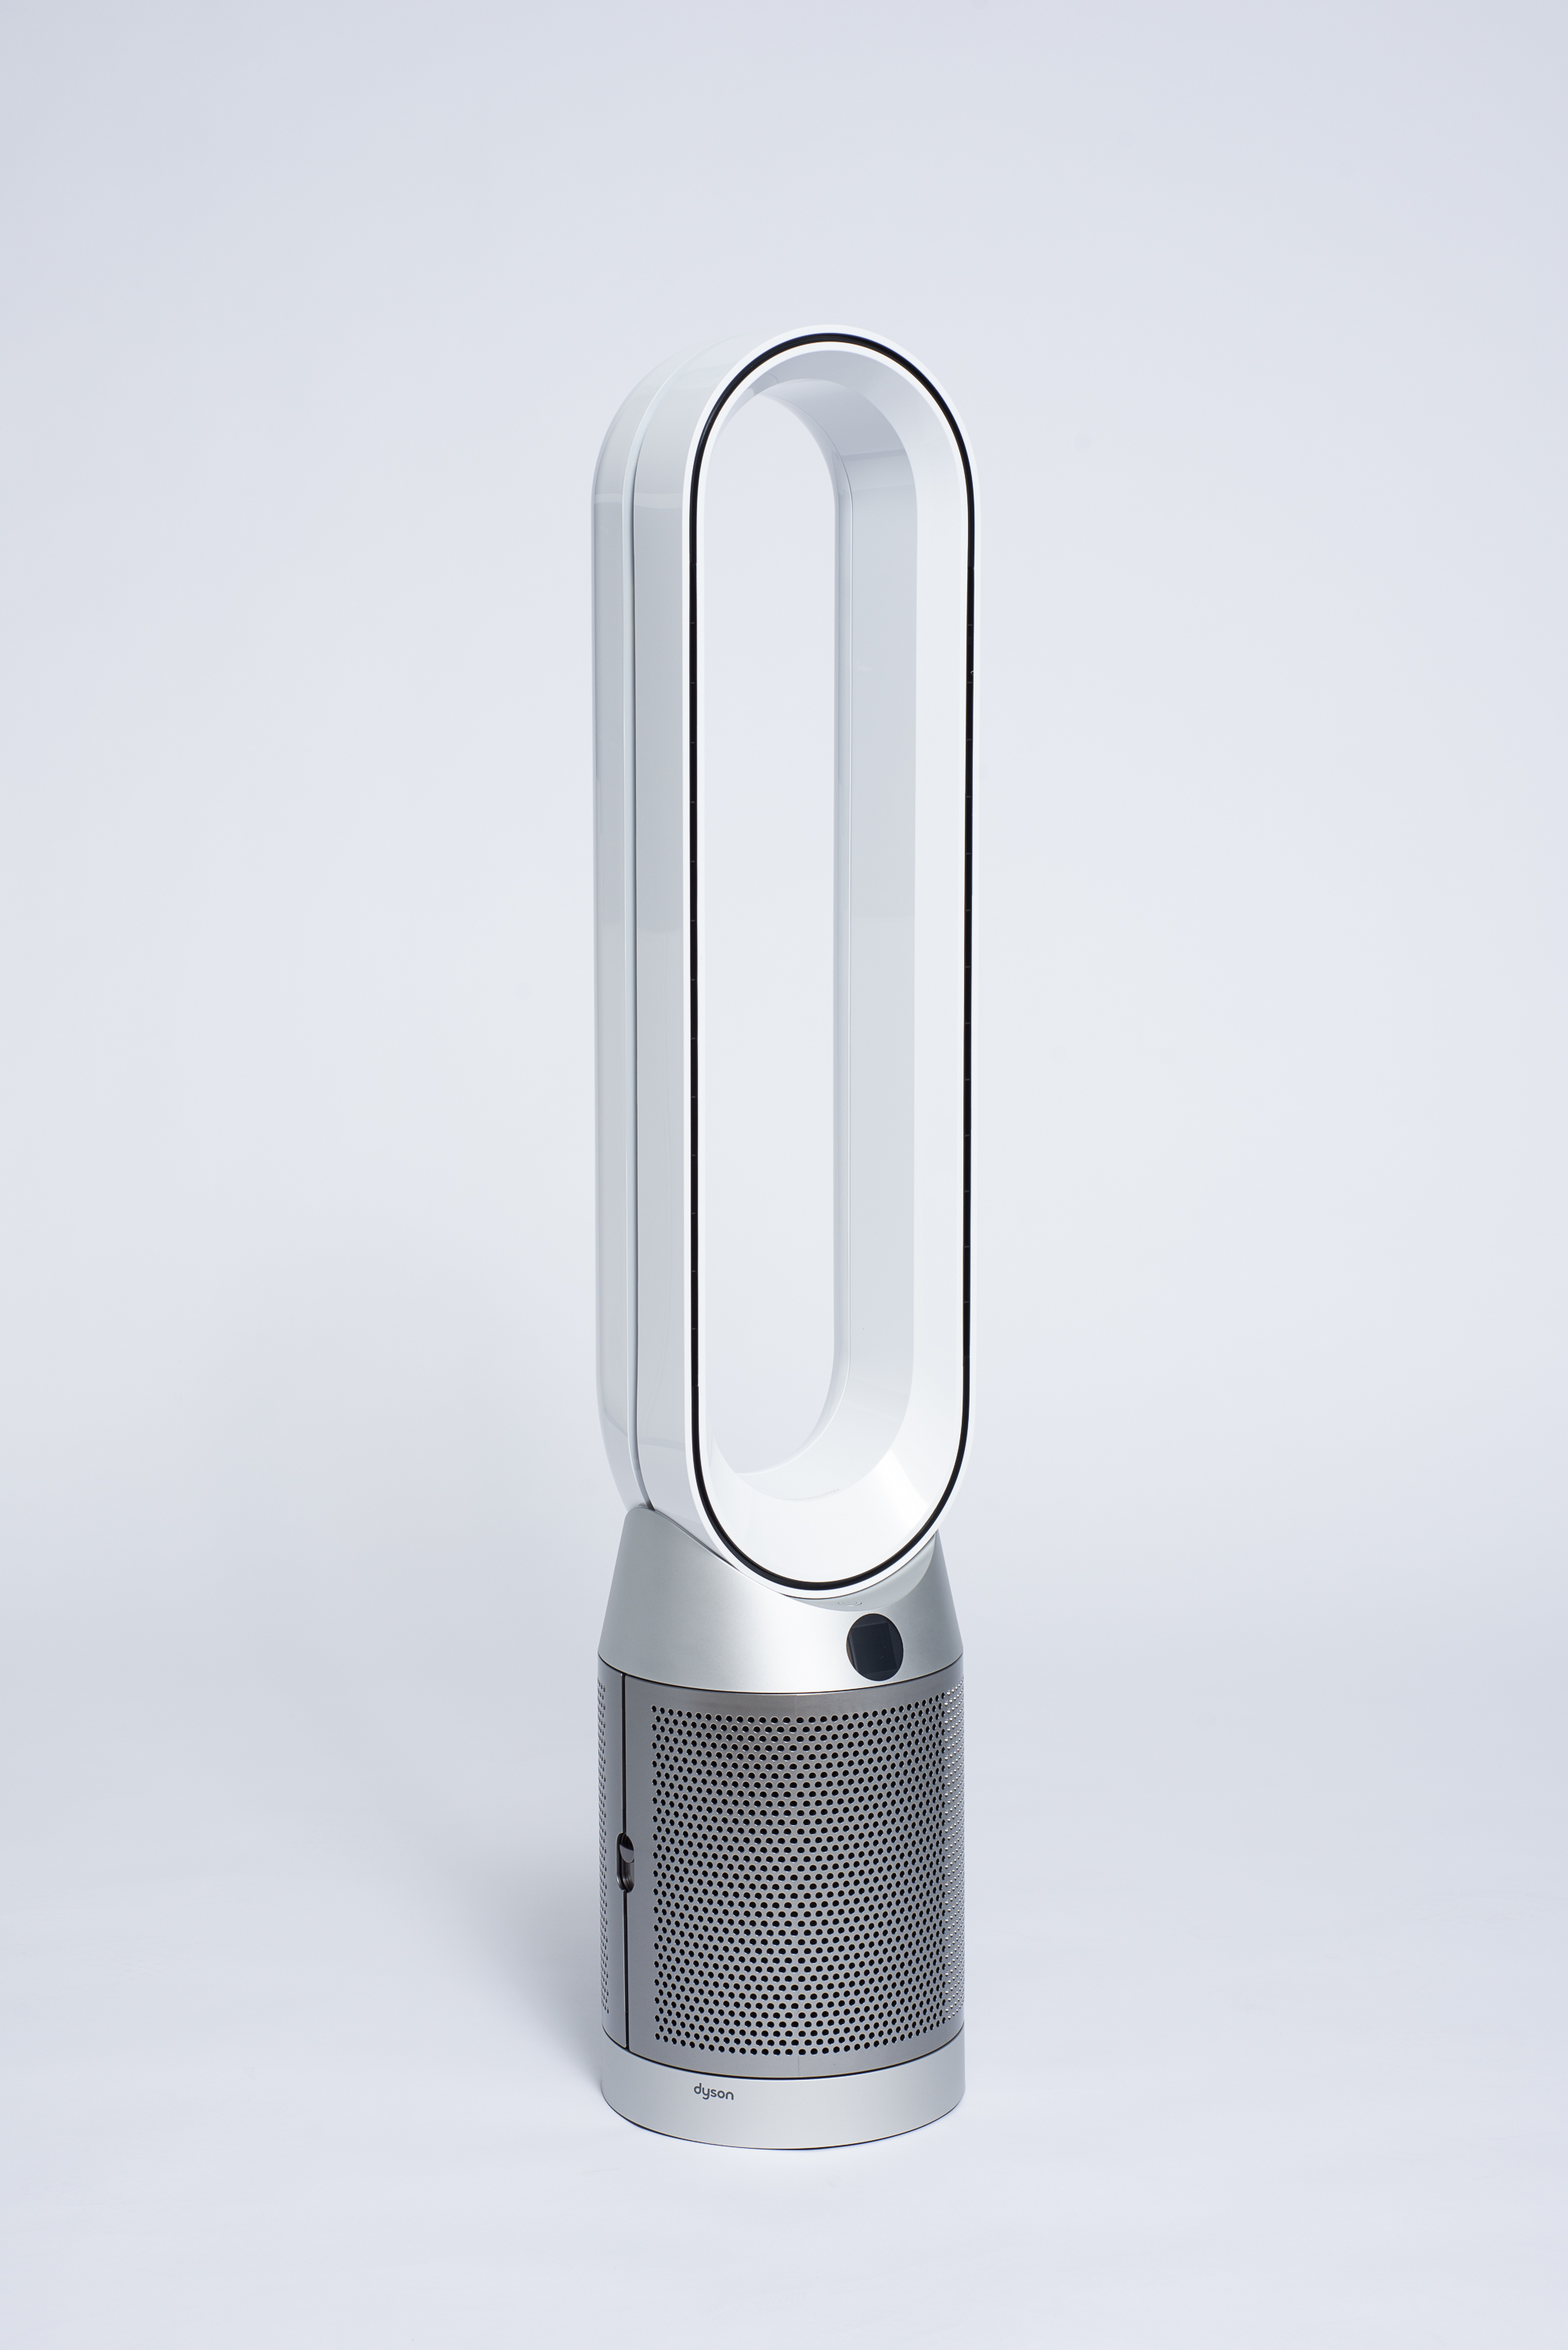 Dyson's upmarket fan is supposed to purify the air